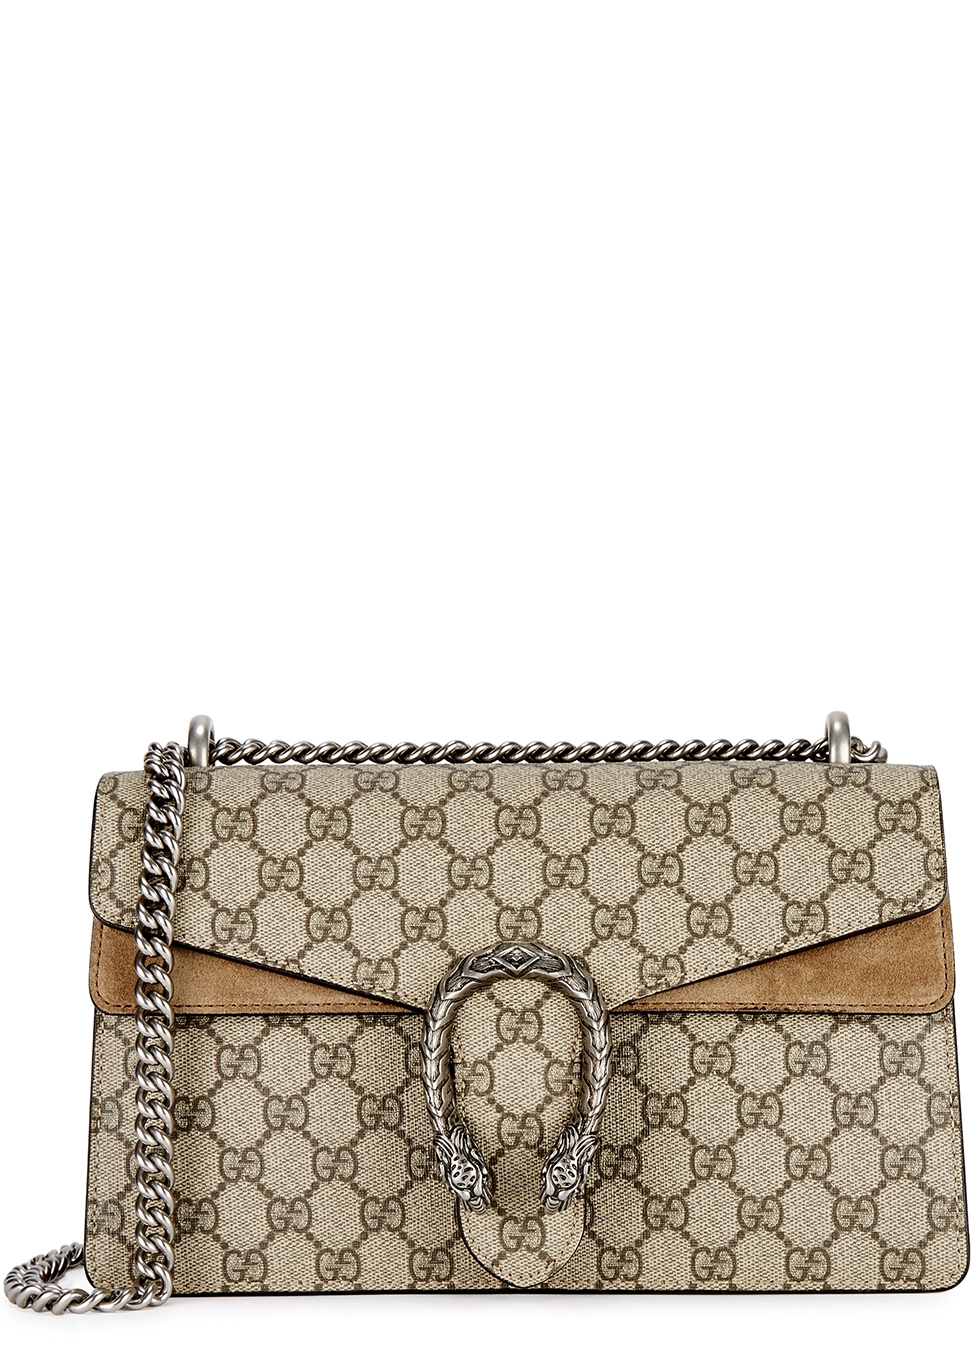 gucci sling bag for women